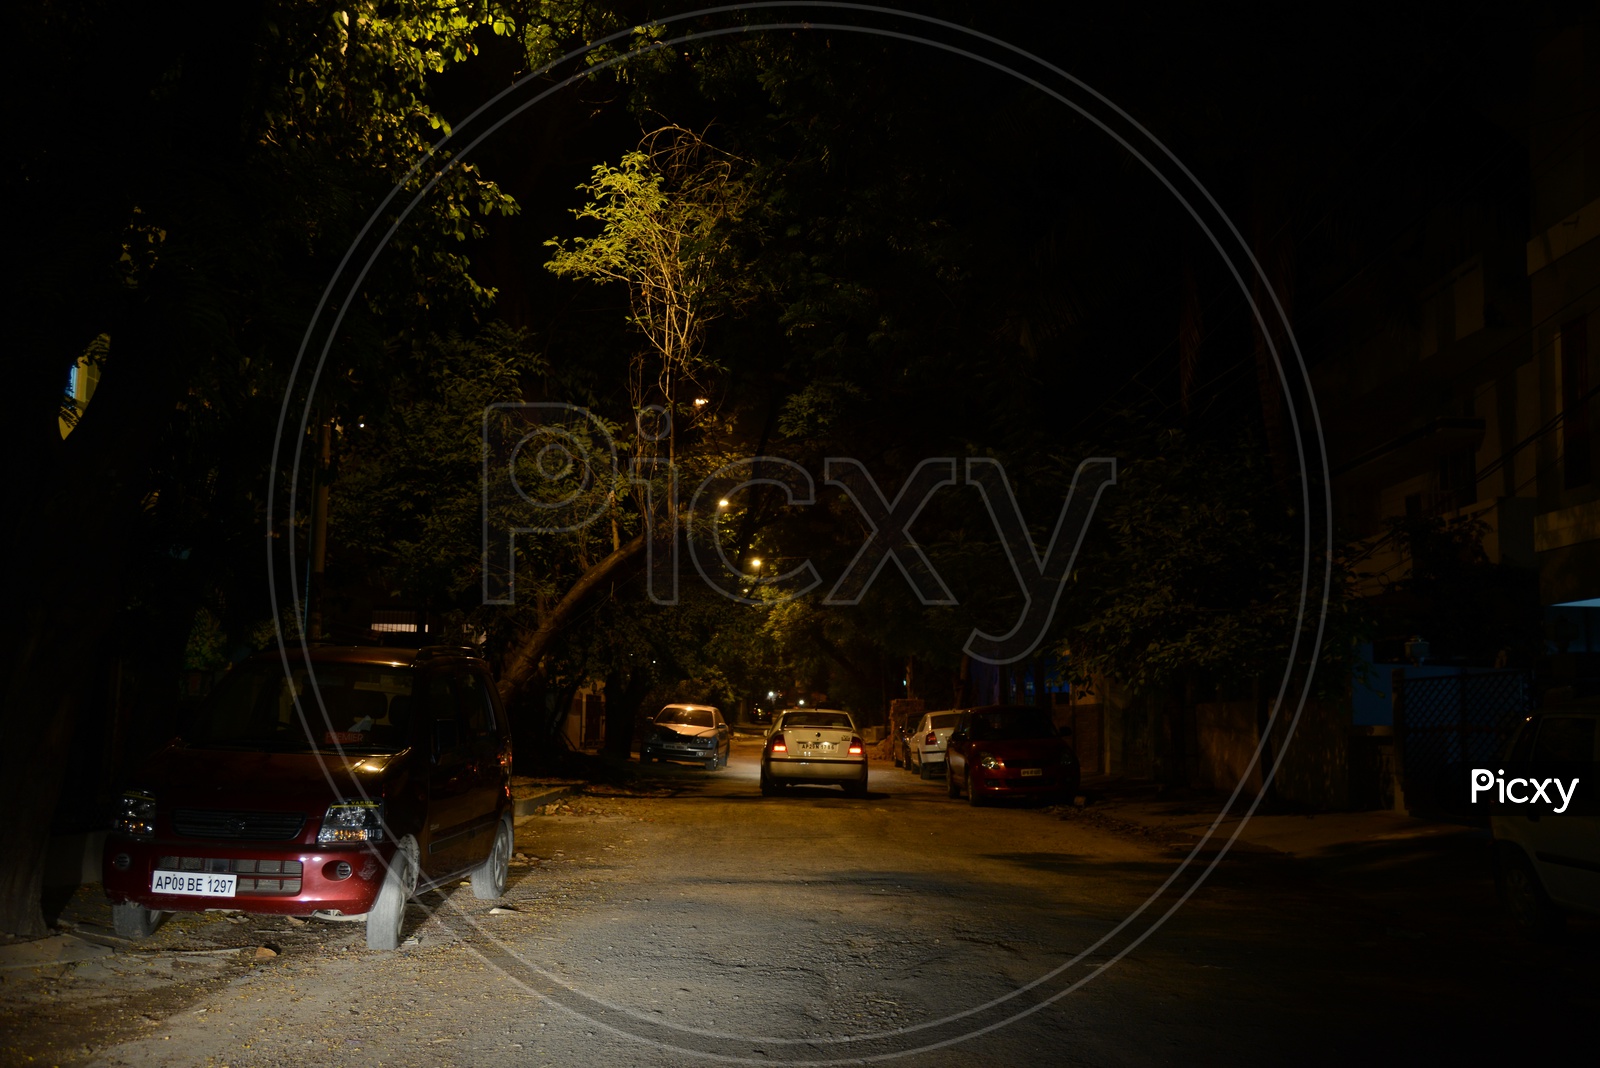 Car Moving In a colony Road In Night Time